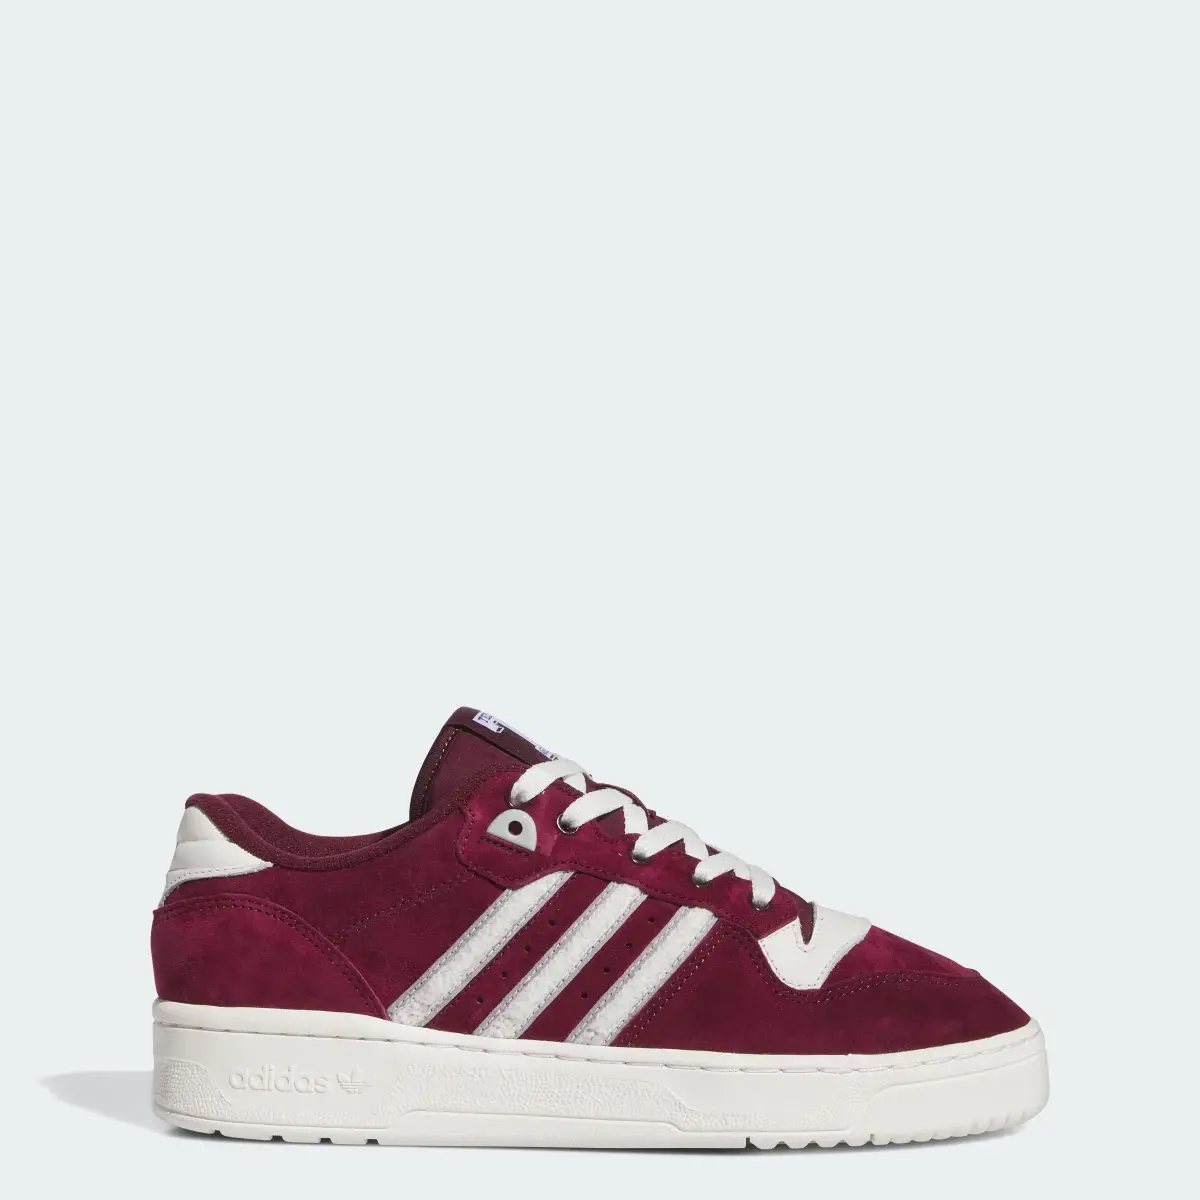 Adidas Texas A&M Rivalry Low Shoes. 1